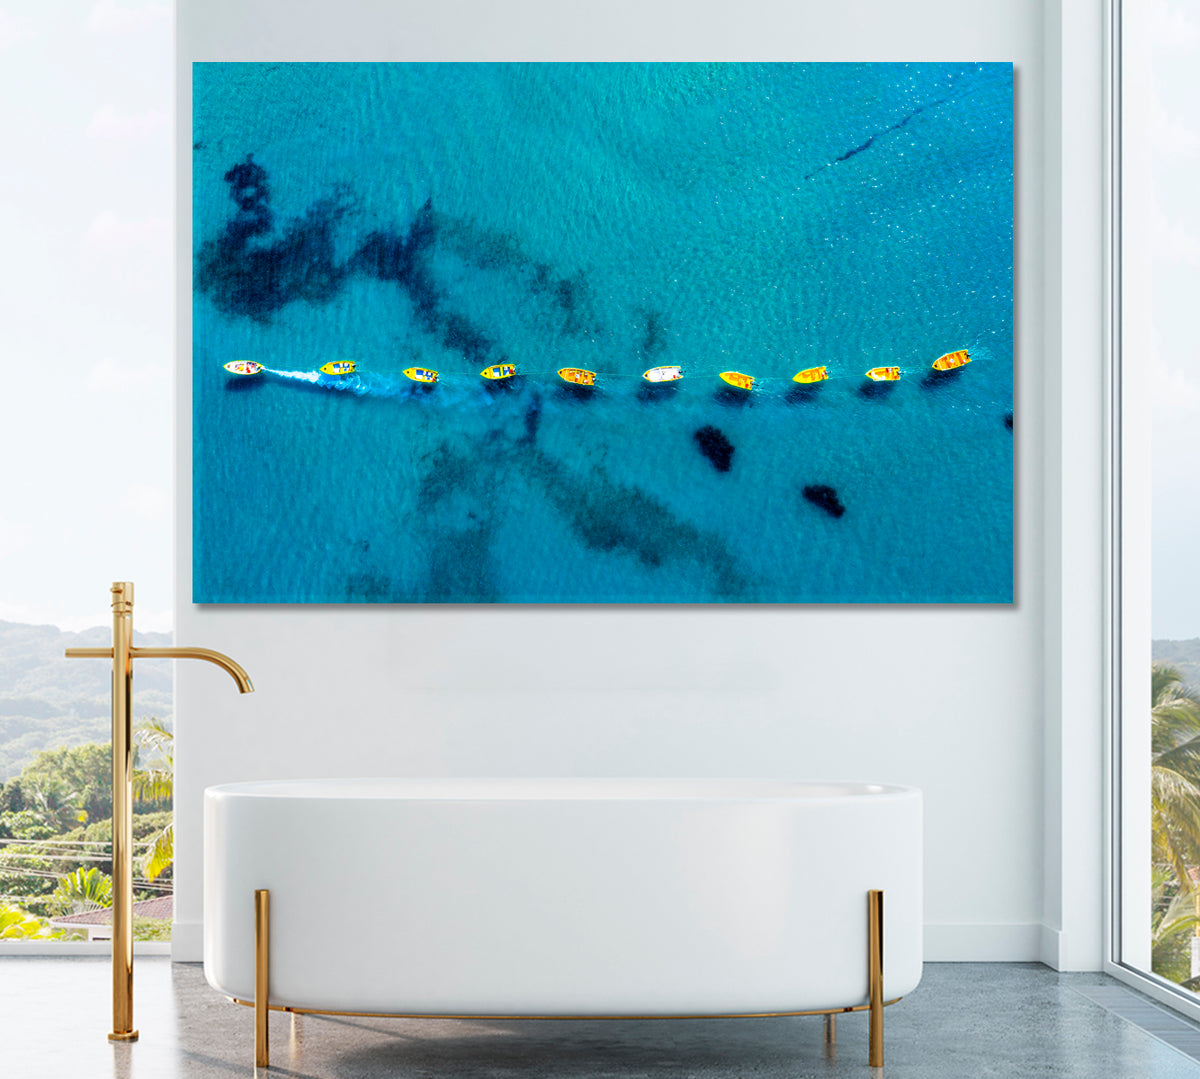 Boats in Turquoise Ocean Canvas Print ArtLexy 1 Panel 24"x16" inches 